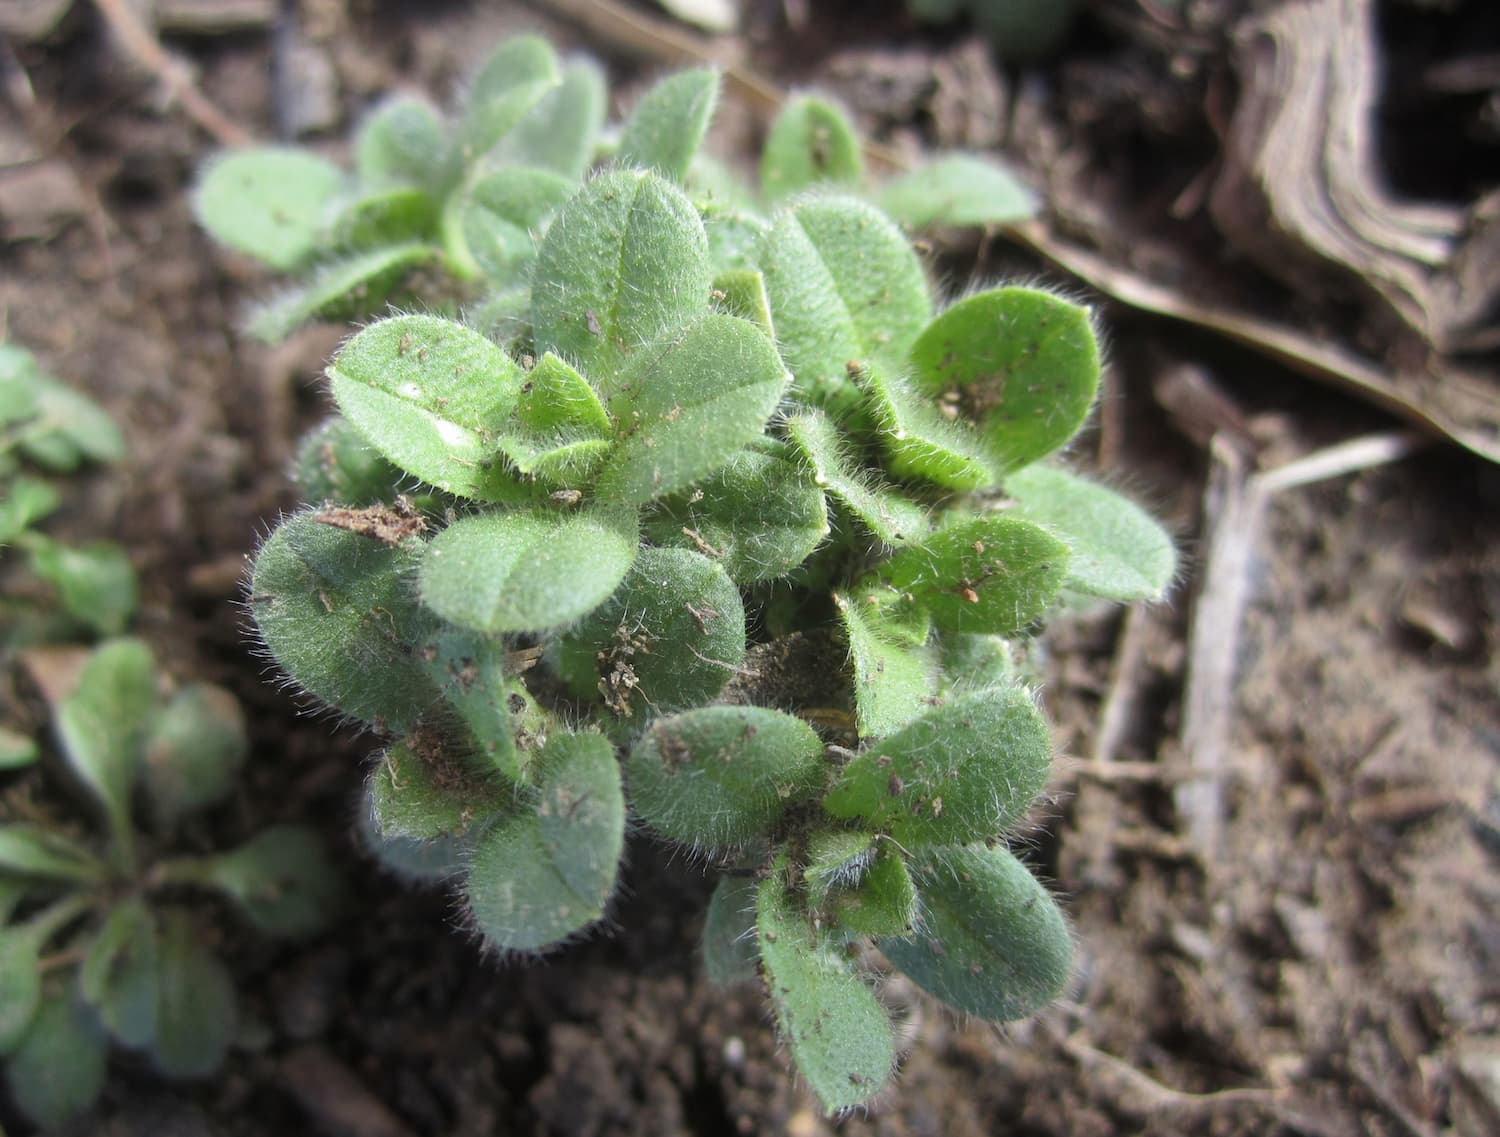 Mouse-ear chickweed is also edible but too hairy to be palatable.